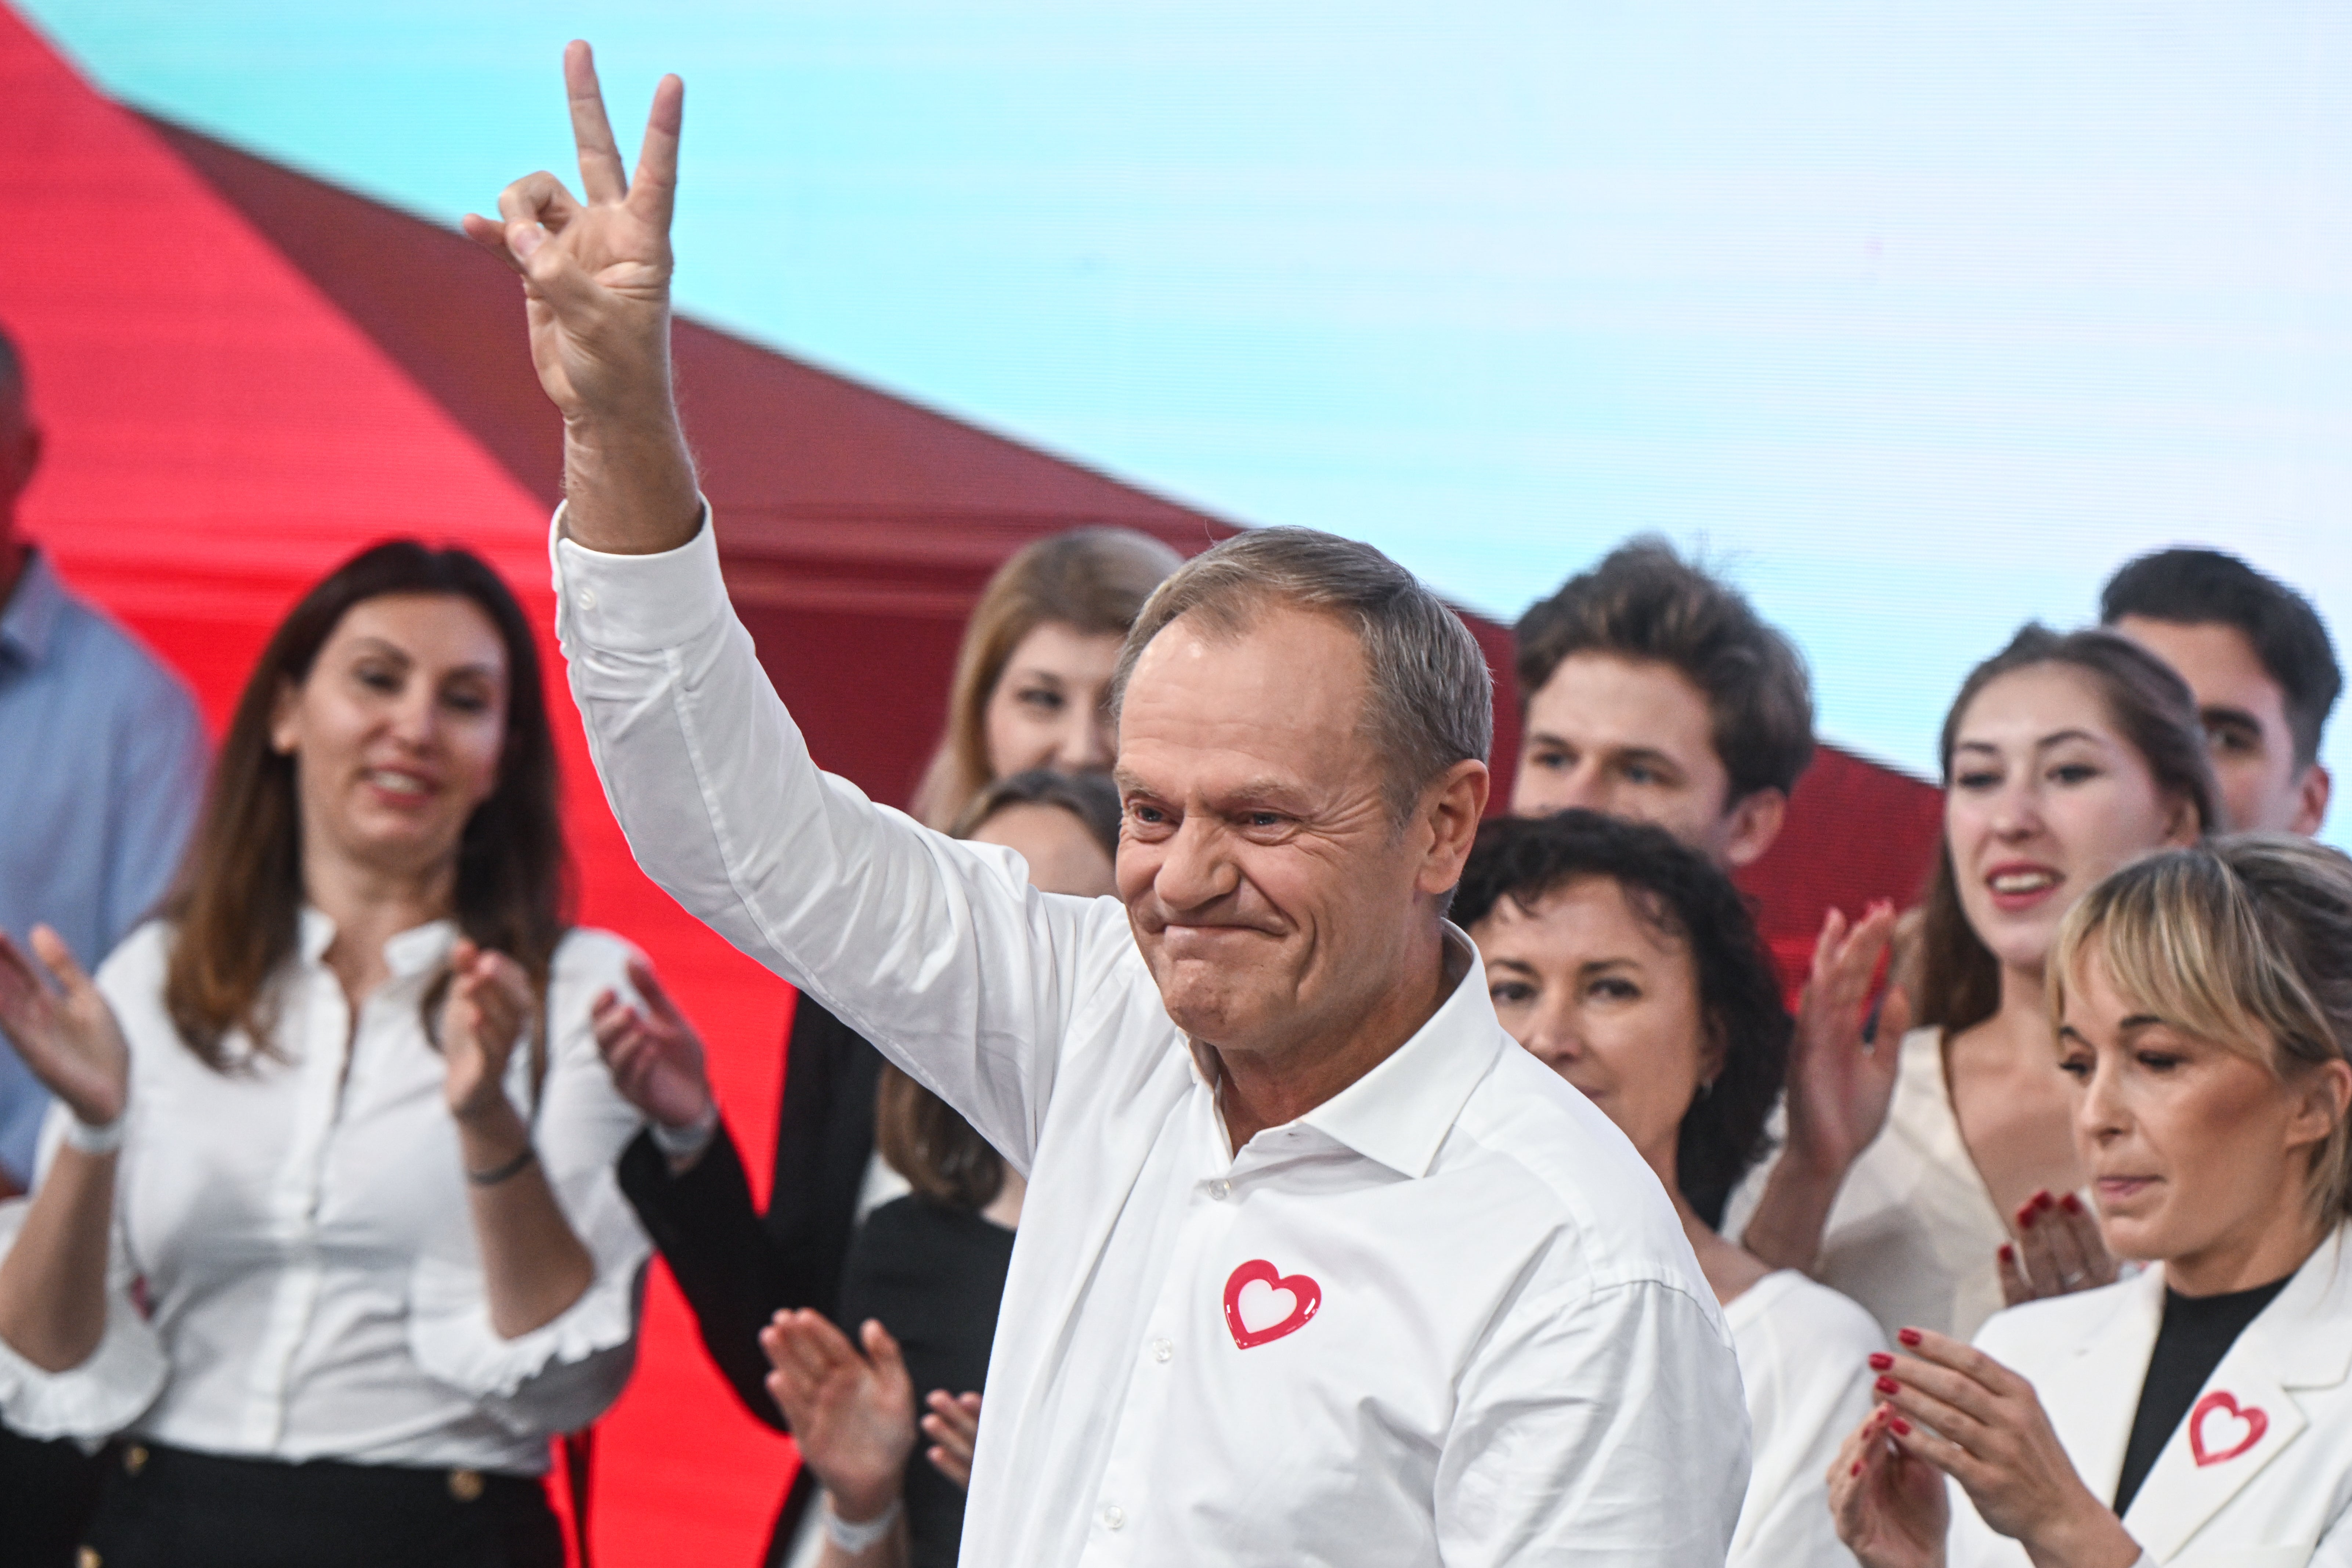 Donald Tusk, the leader of Civic Coalition (KO), celebrates the exit poll in Poland’s election